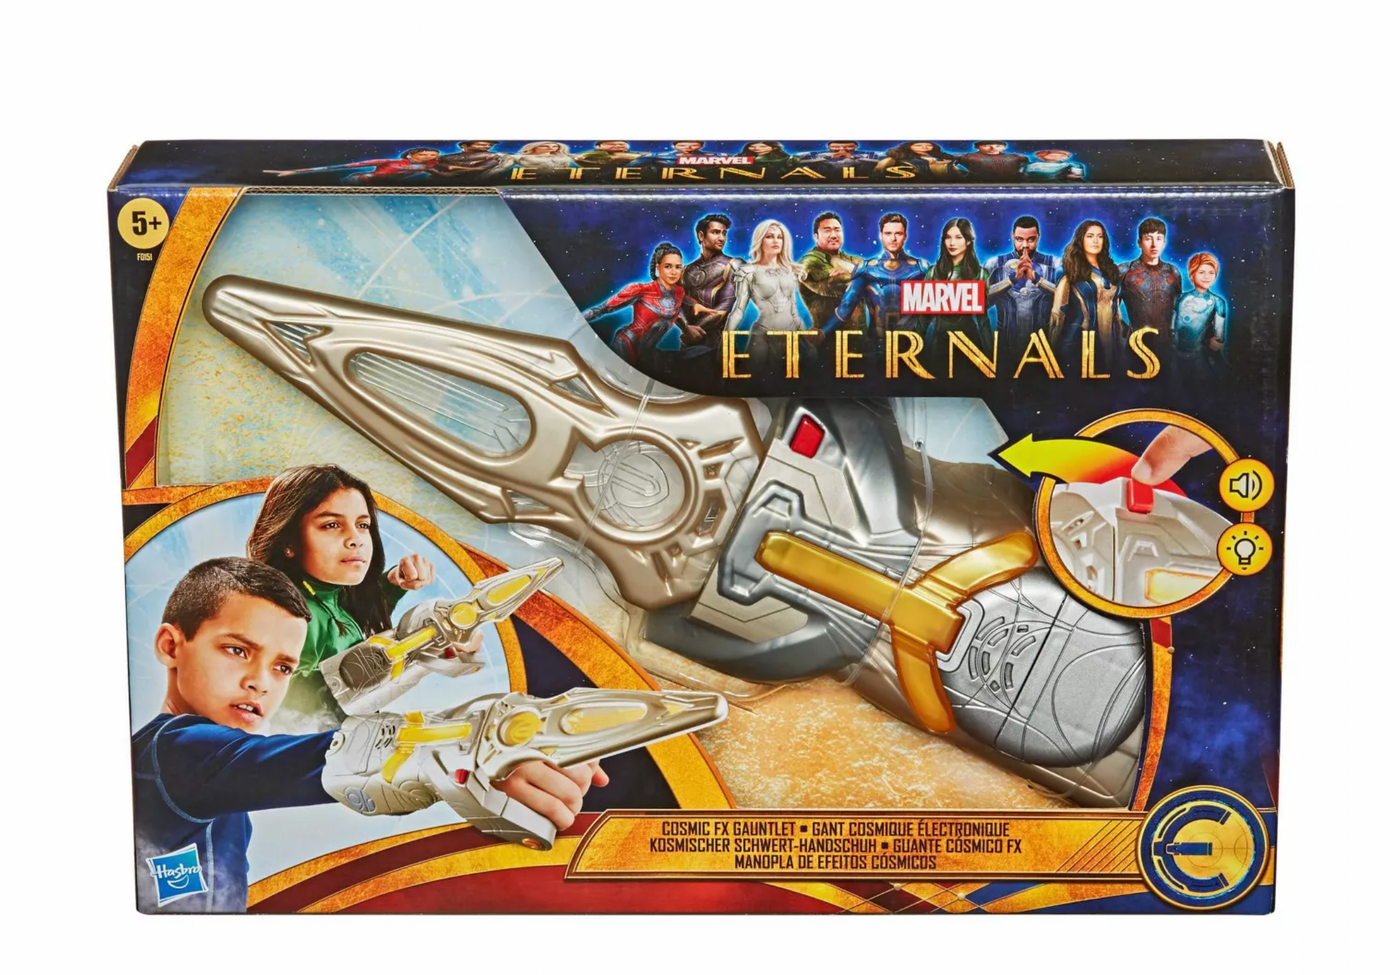 Disney Eternals Deluxe Cosmic FX Gauntlet Electronic Toy by Hasbro New with Box